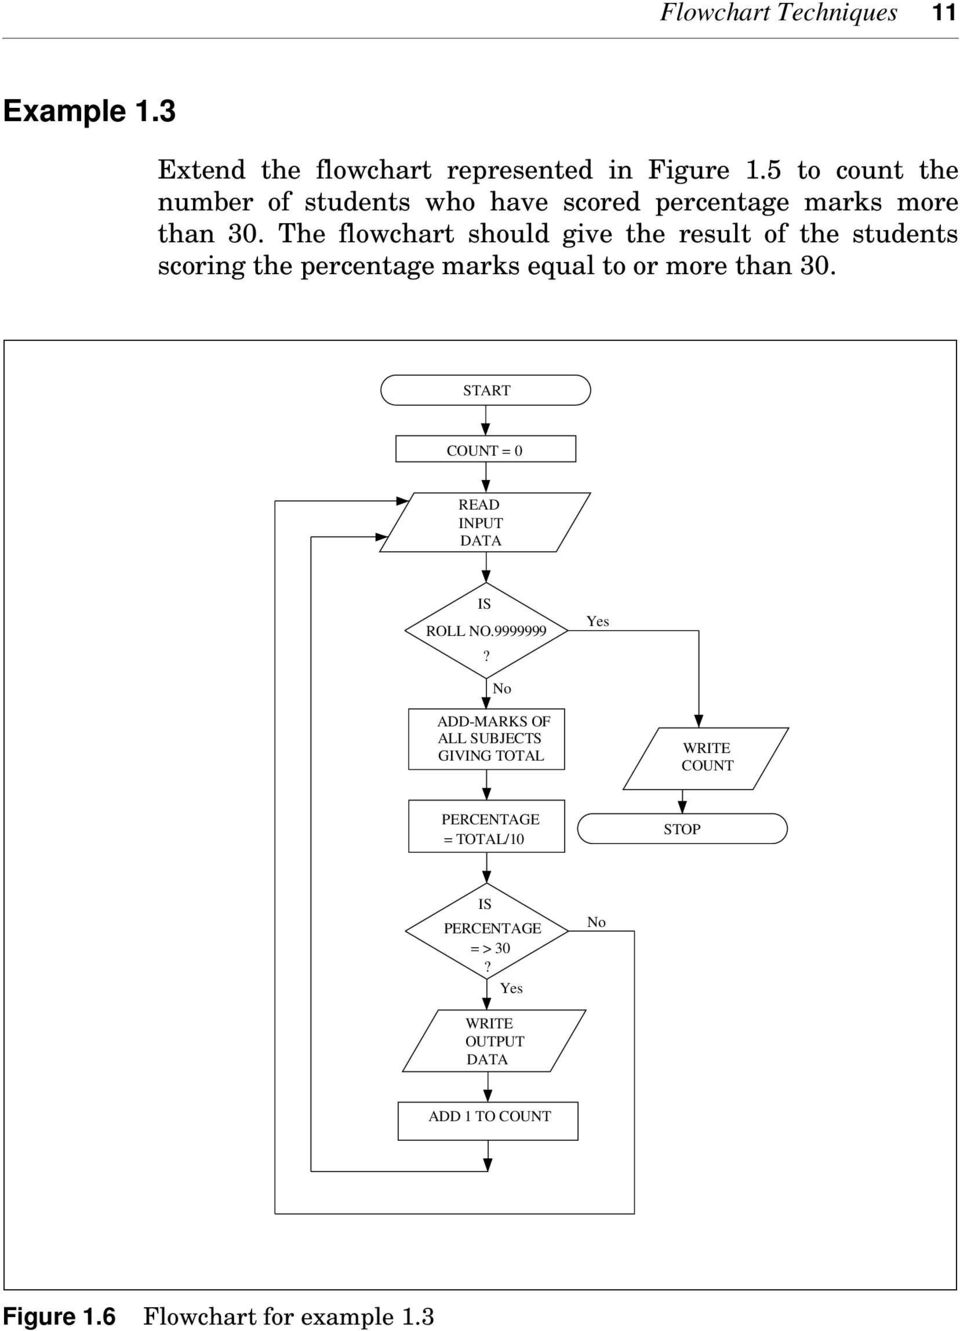 The flowchart should give the result of the students scoring the percentage marks equal to or more than 30.